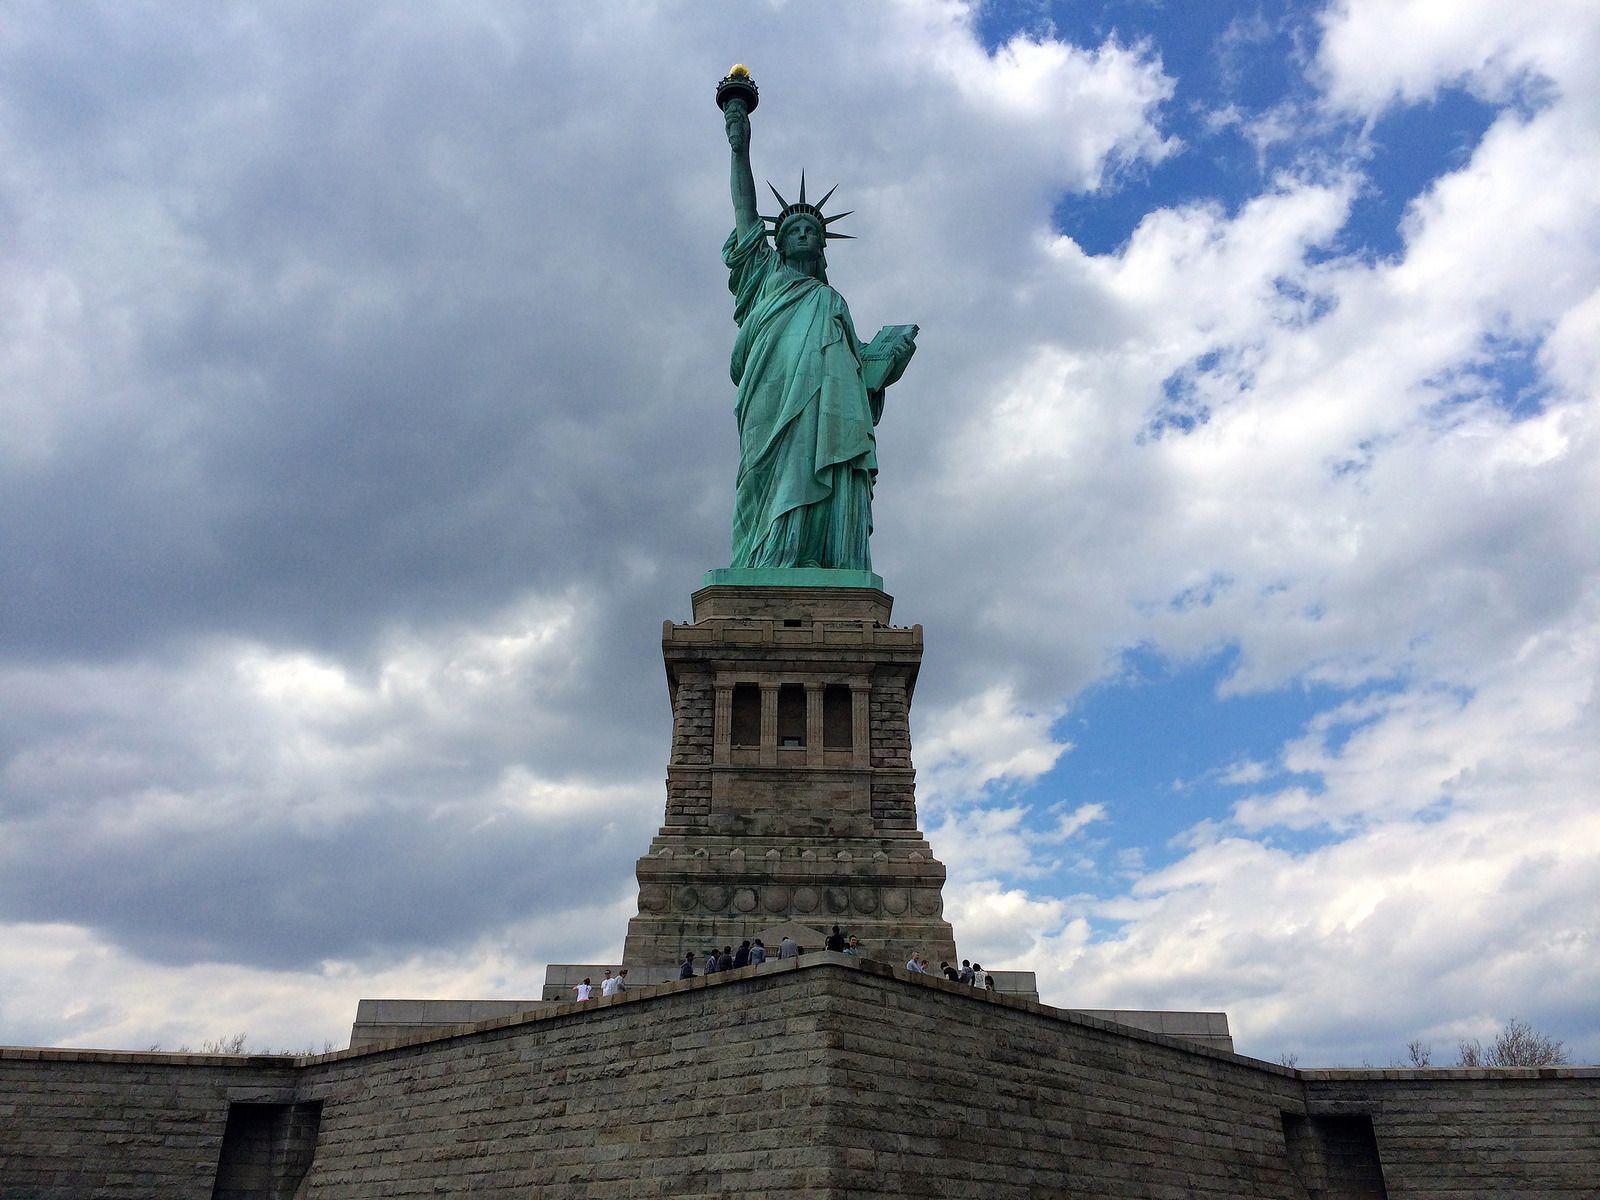 Liberty Enlightening the World: The Statue of Liberty and Ellis